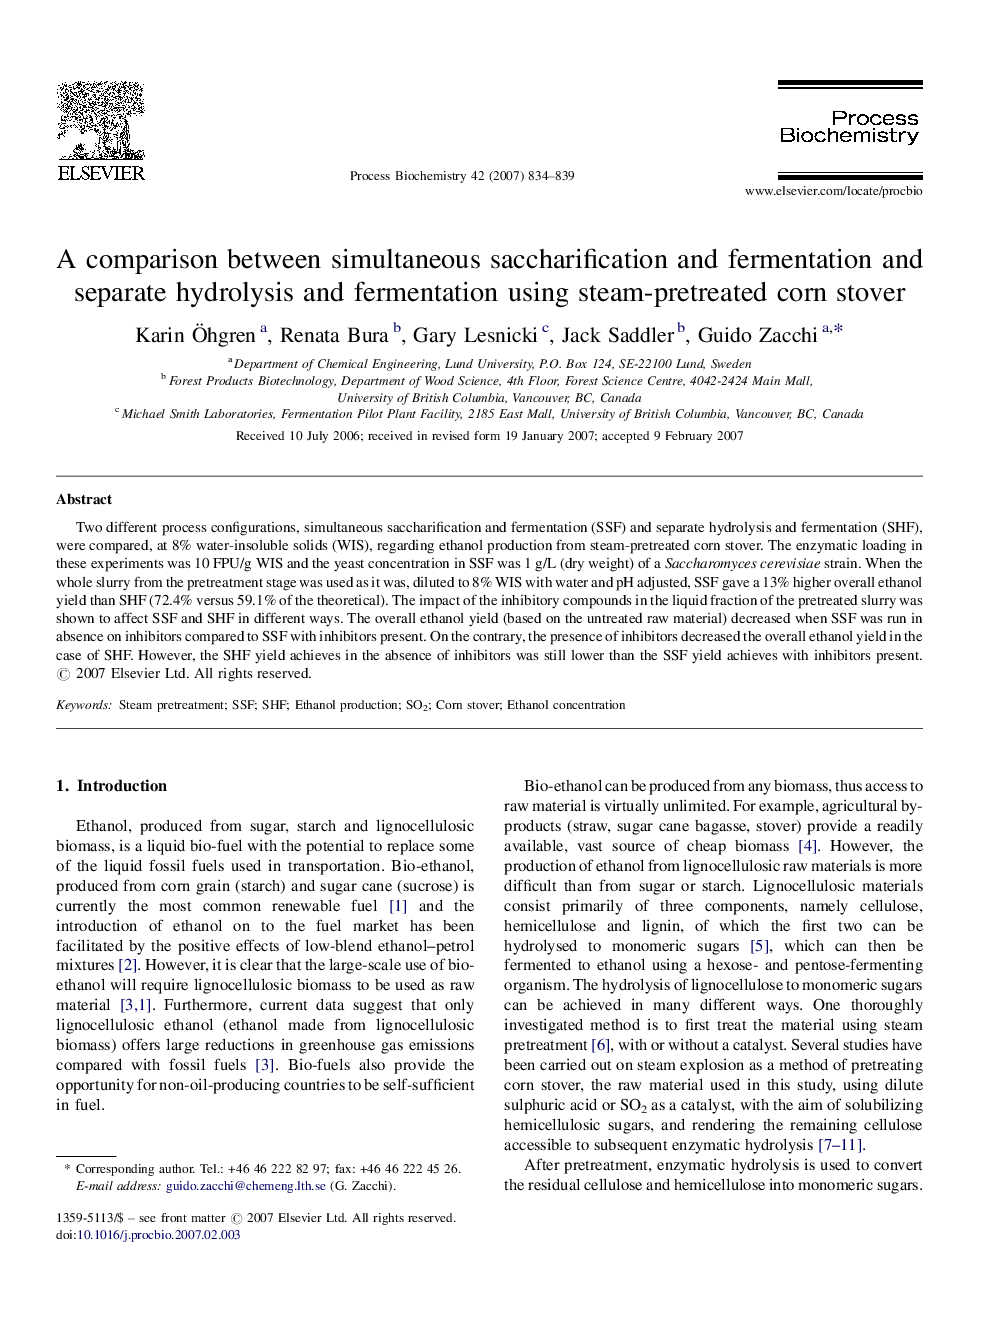 A comparison between simultaneous saccharification and fermentation and separate hydrolysis and fermentation using steam-pretreated corn stover